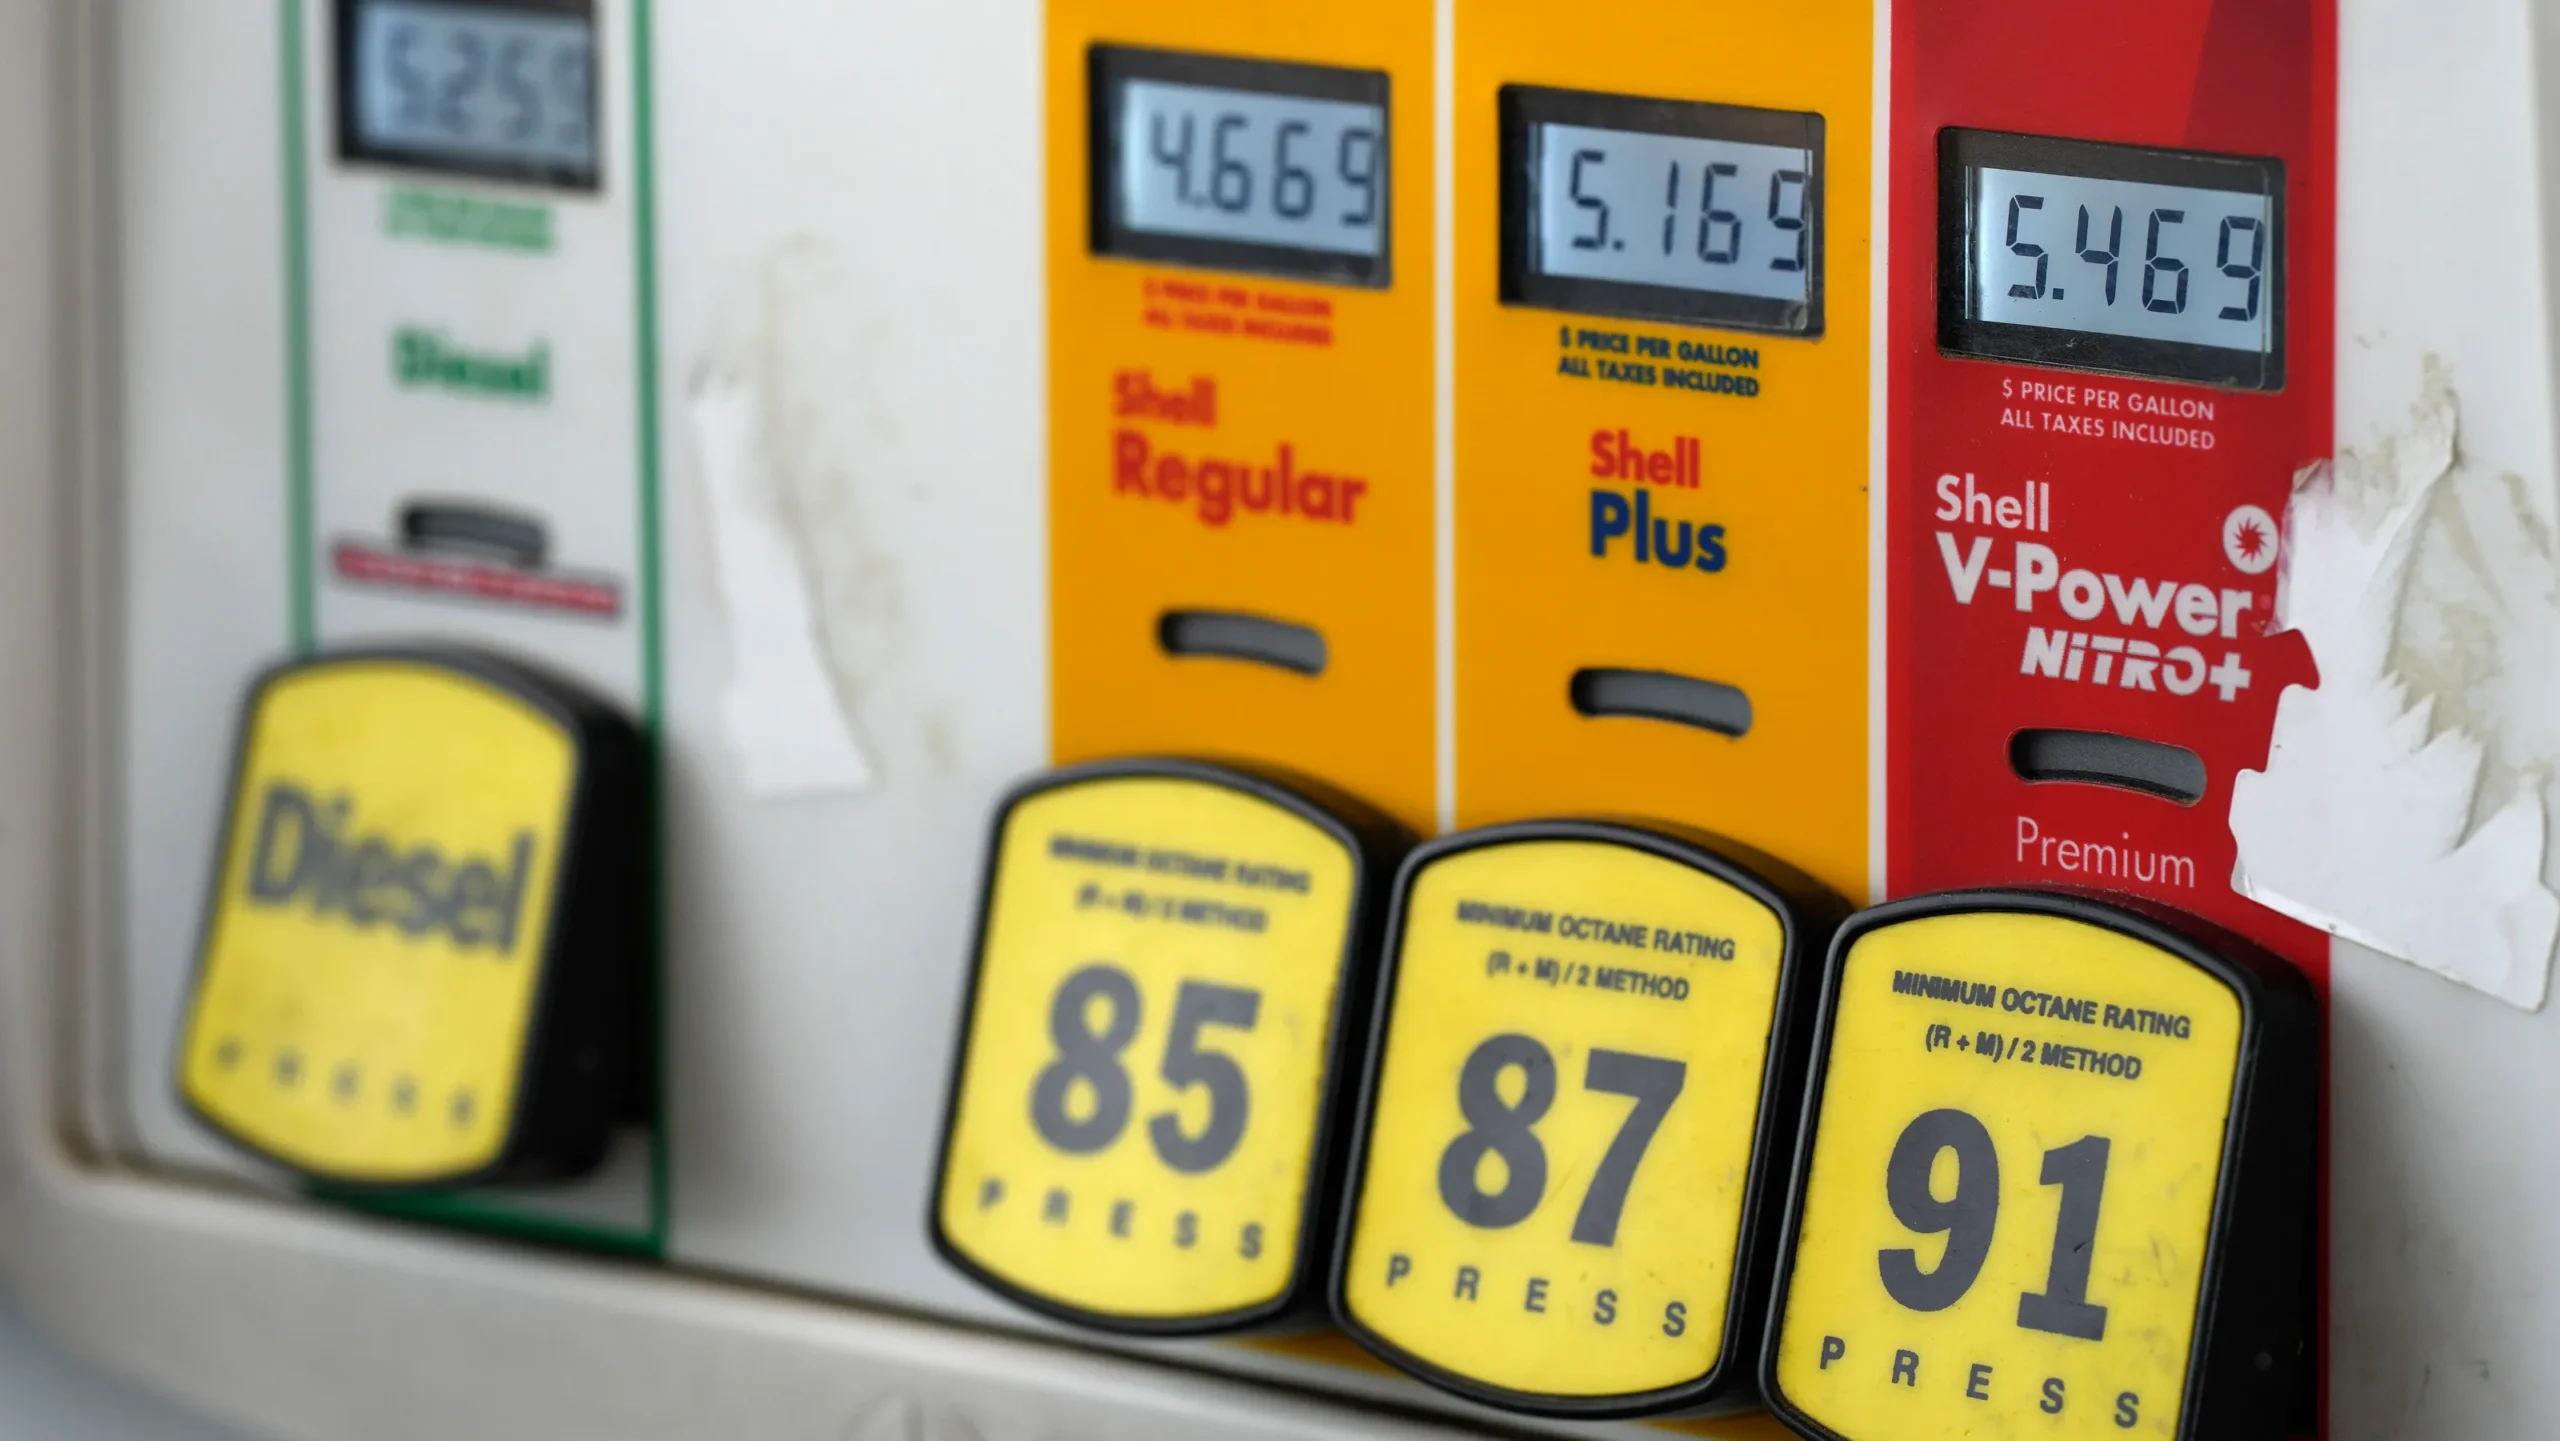 Gasoline prices will increase in the Netherlands from 1 July